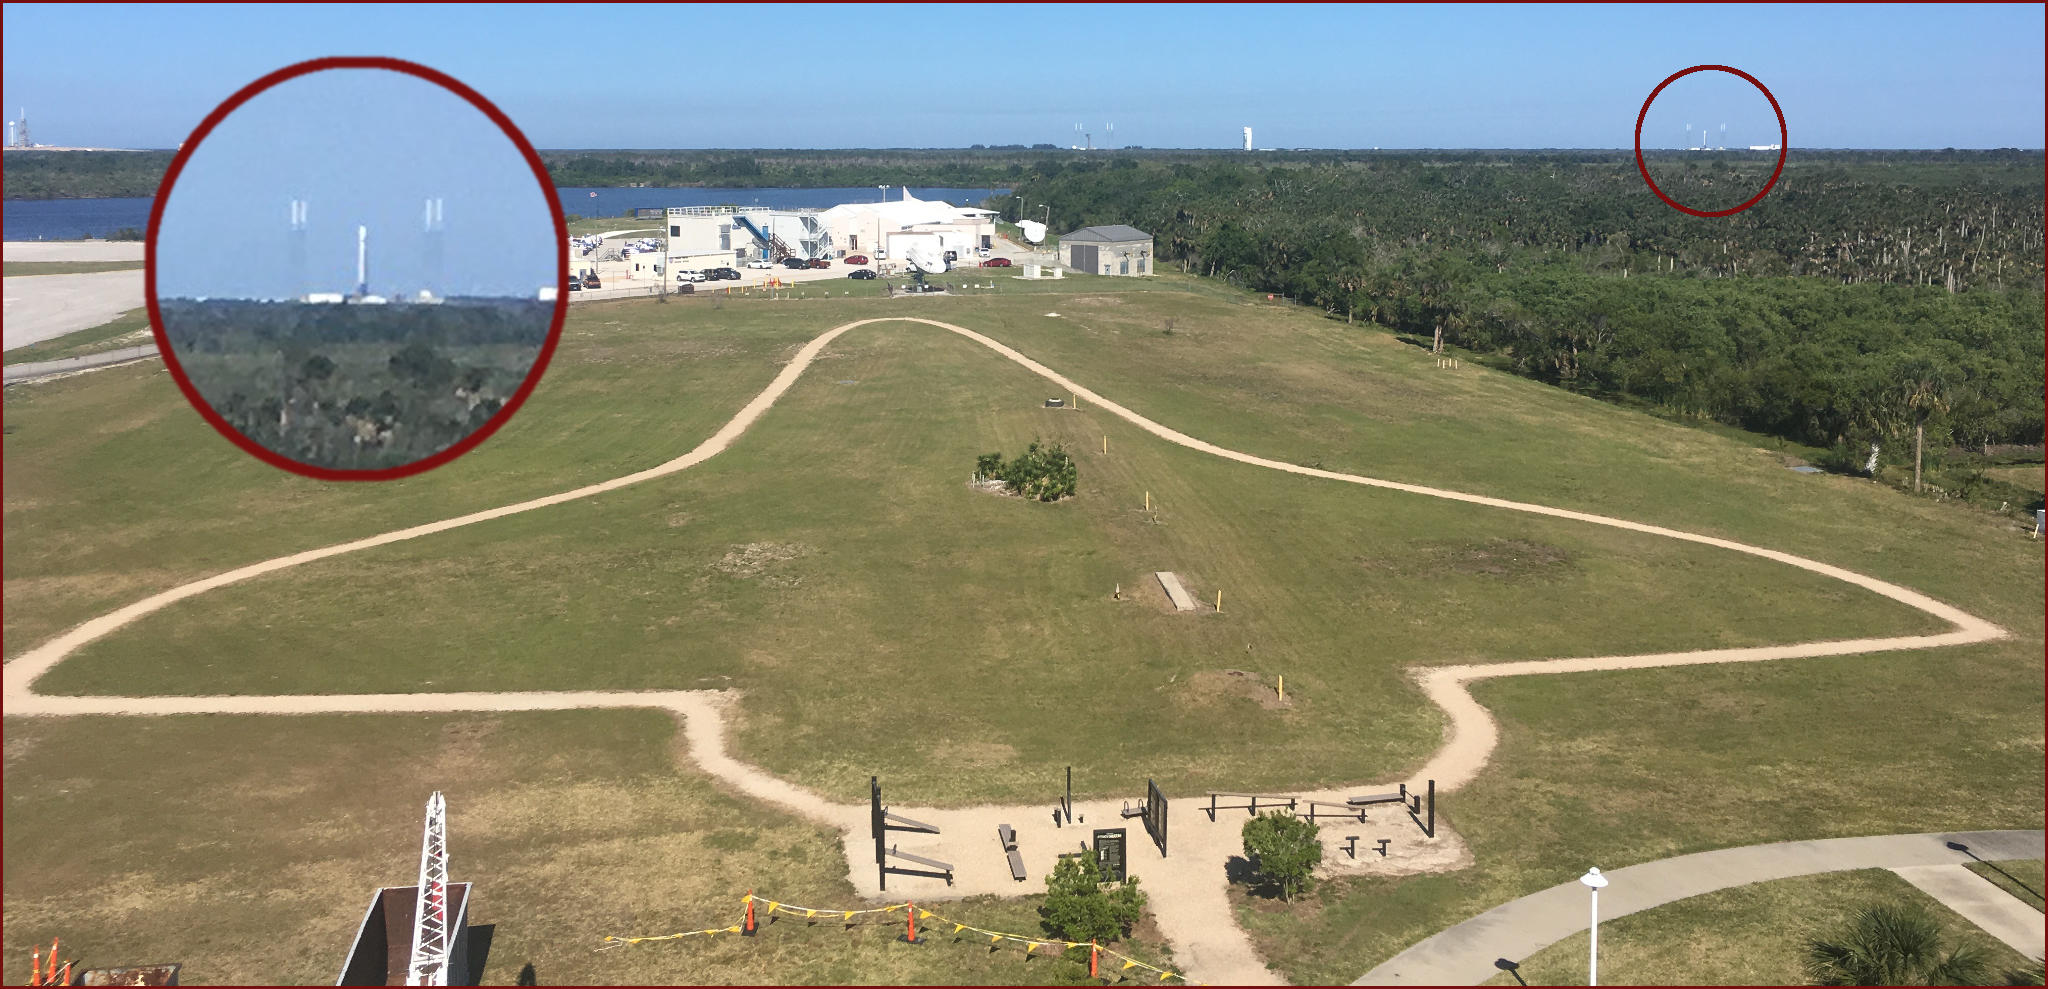 TESS on the launchpad, way off in the distance. The outline of the space shuttle in the lawn is a running track